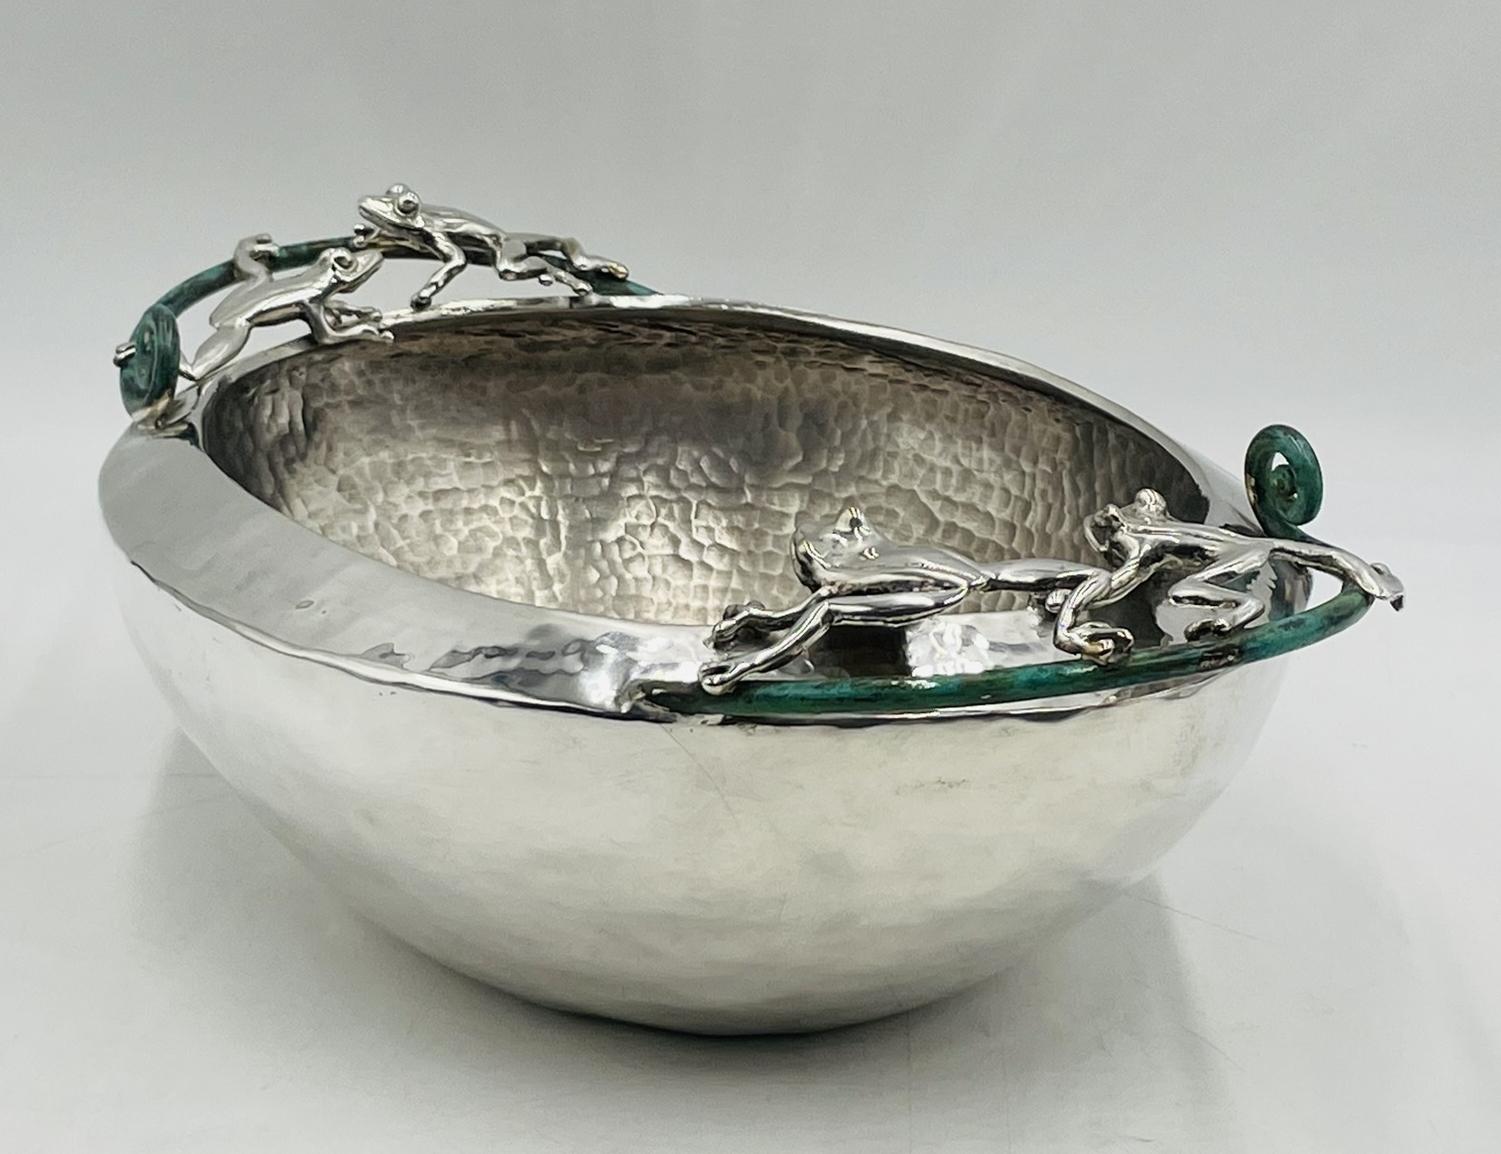 Hand-Crafted Large Silver-Plated Bowl With Frogs Handles by Emilia Castillo, Mexico 21st Cent For Sale